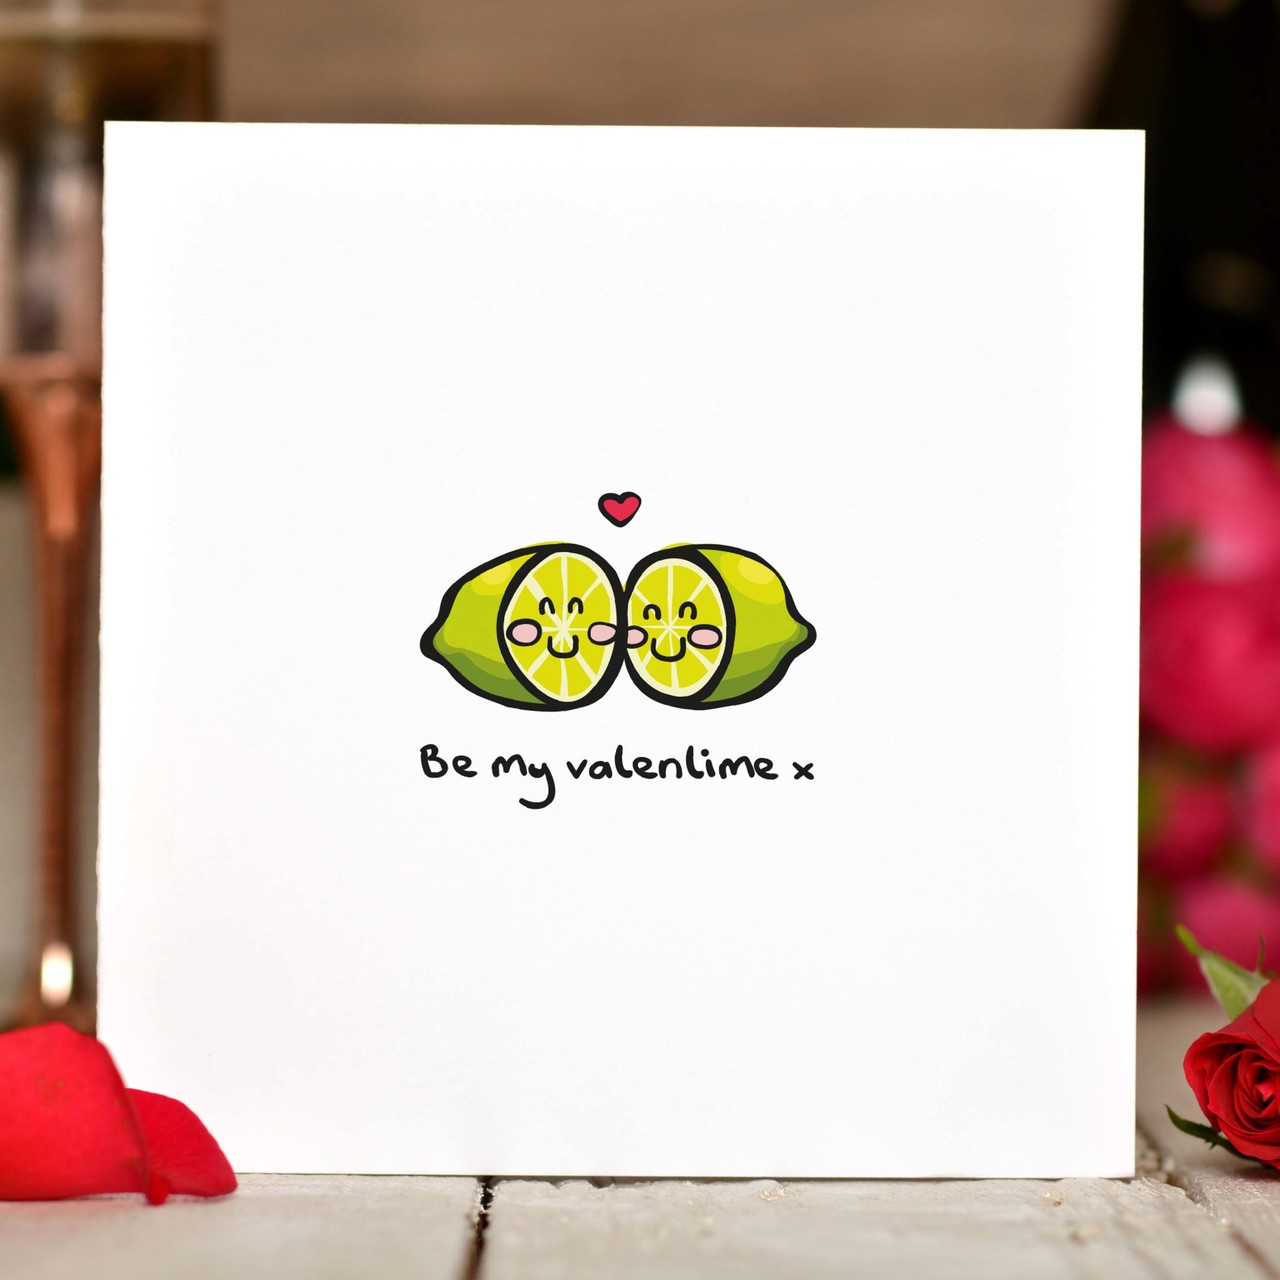 Be my valenlime x Card